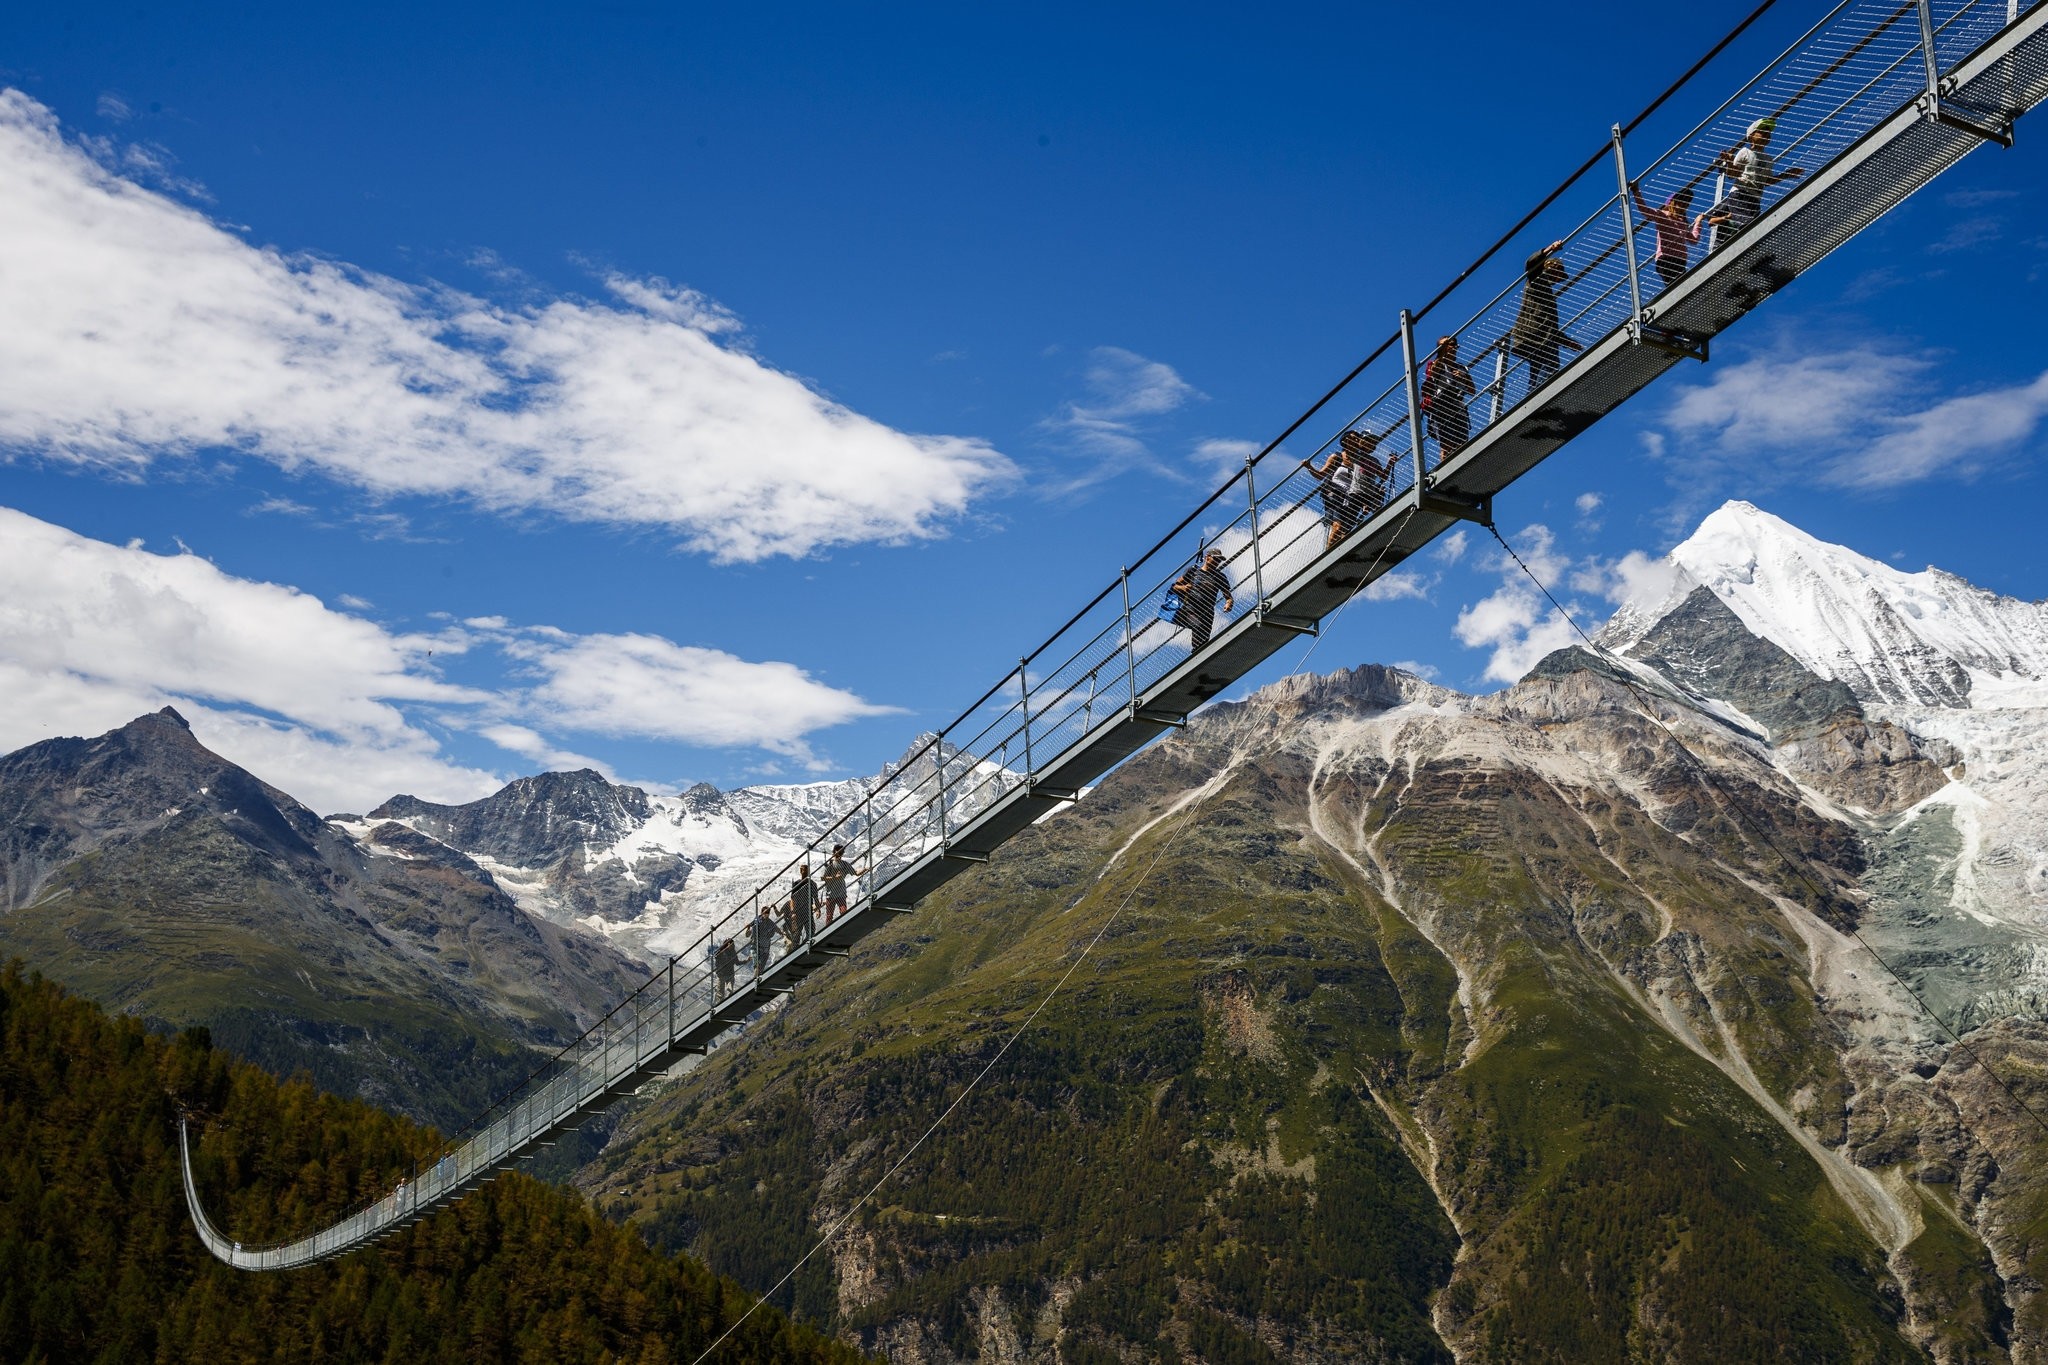 People walk on the 'Europabruecke' bridge, the world's longest pedestrian suspension bridge with a length of 494m, after the official inauguration of the construction in Switzerland, 29 July 2017. (EPA Photo)